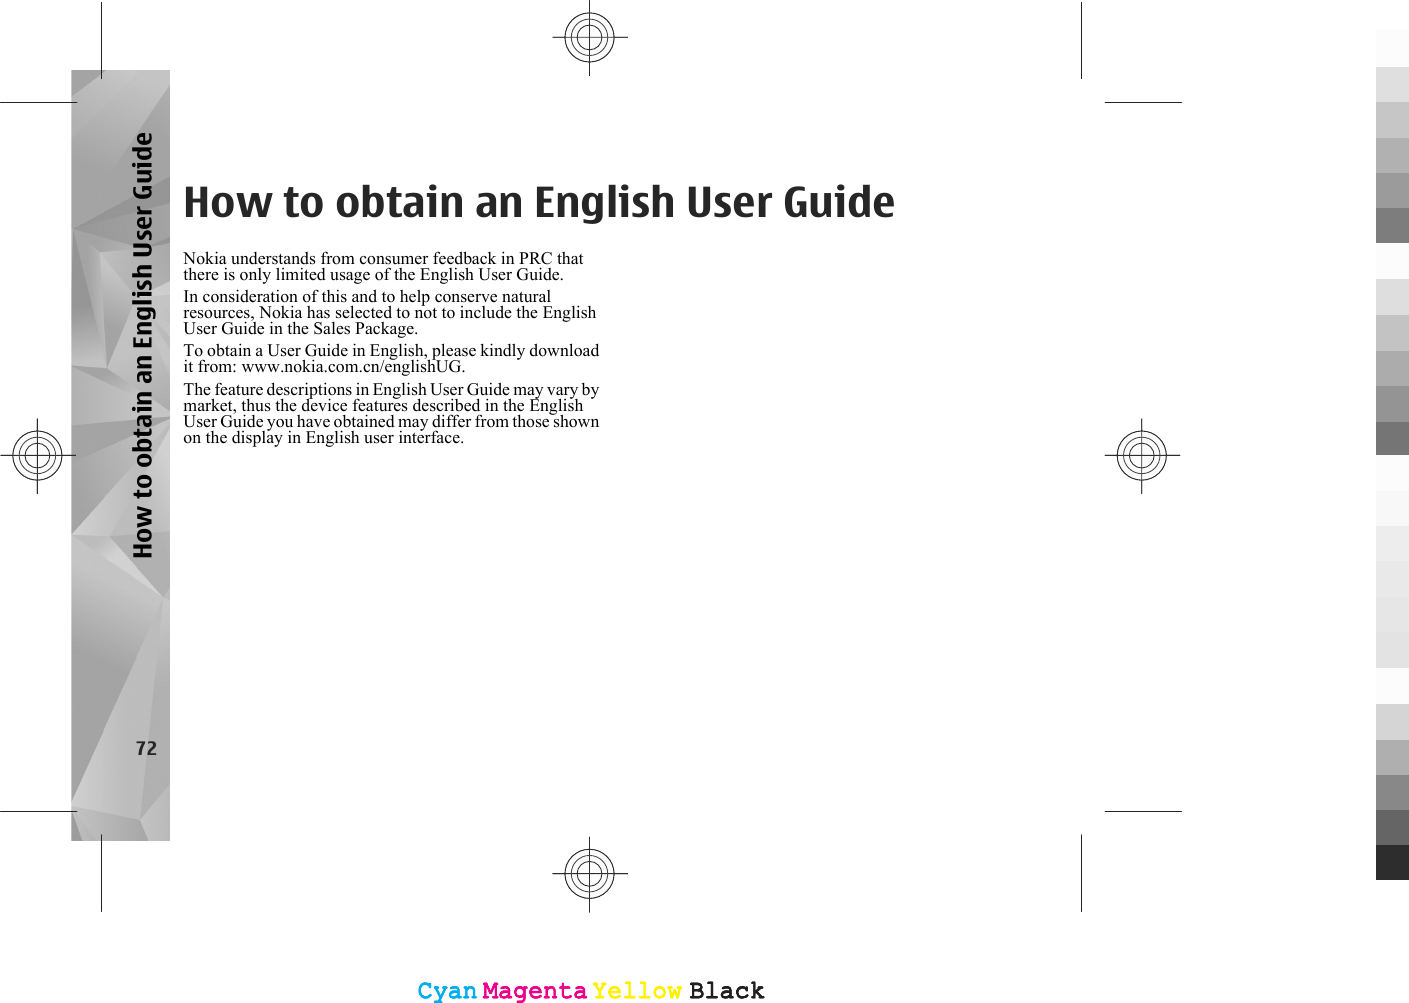 How to obtain an English User GuideNokia understands from consumer feedback in PRC thatthere is only limited usage of the English User Guide.In consideration of this and to help conserve naturalresources, Nokia has selected to not to include the EnglishUser Guide in the Sales Package.To obtain a User Guide in English, please kindly downloadit from: www.nokia.com.cn/englishUG.The feature descriptions in English User Guide may vary bymarket, thus the device features described in the EnglishUser Guide you have obtained may differ from those shownon the display in English user interface.72How to obtain an English User GuideCyanCyanMagentaMagentaYellowYellowBlackBlackCyanCyanMagentaMagentaYellowYellowBlackBlack